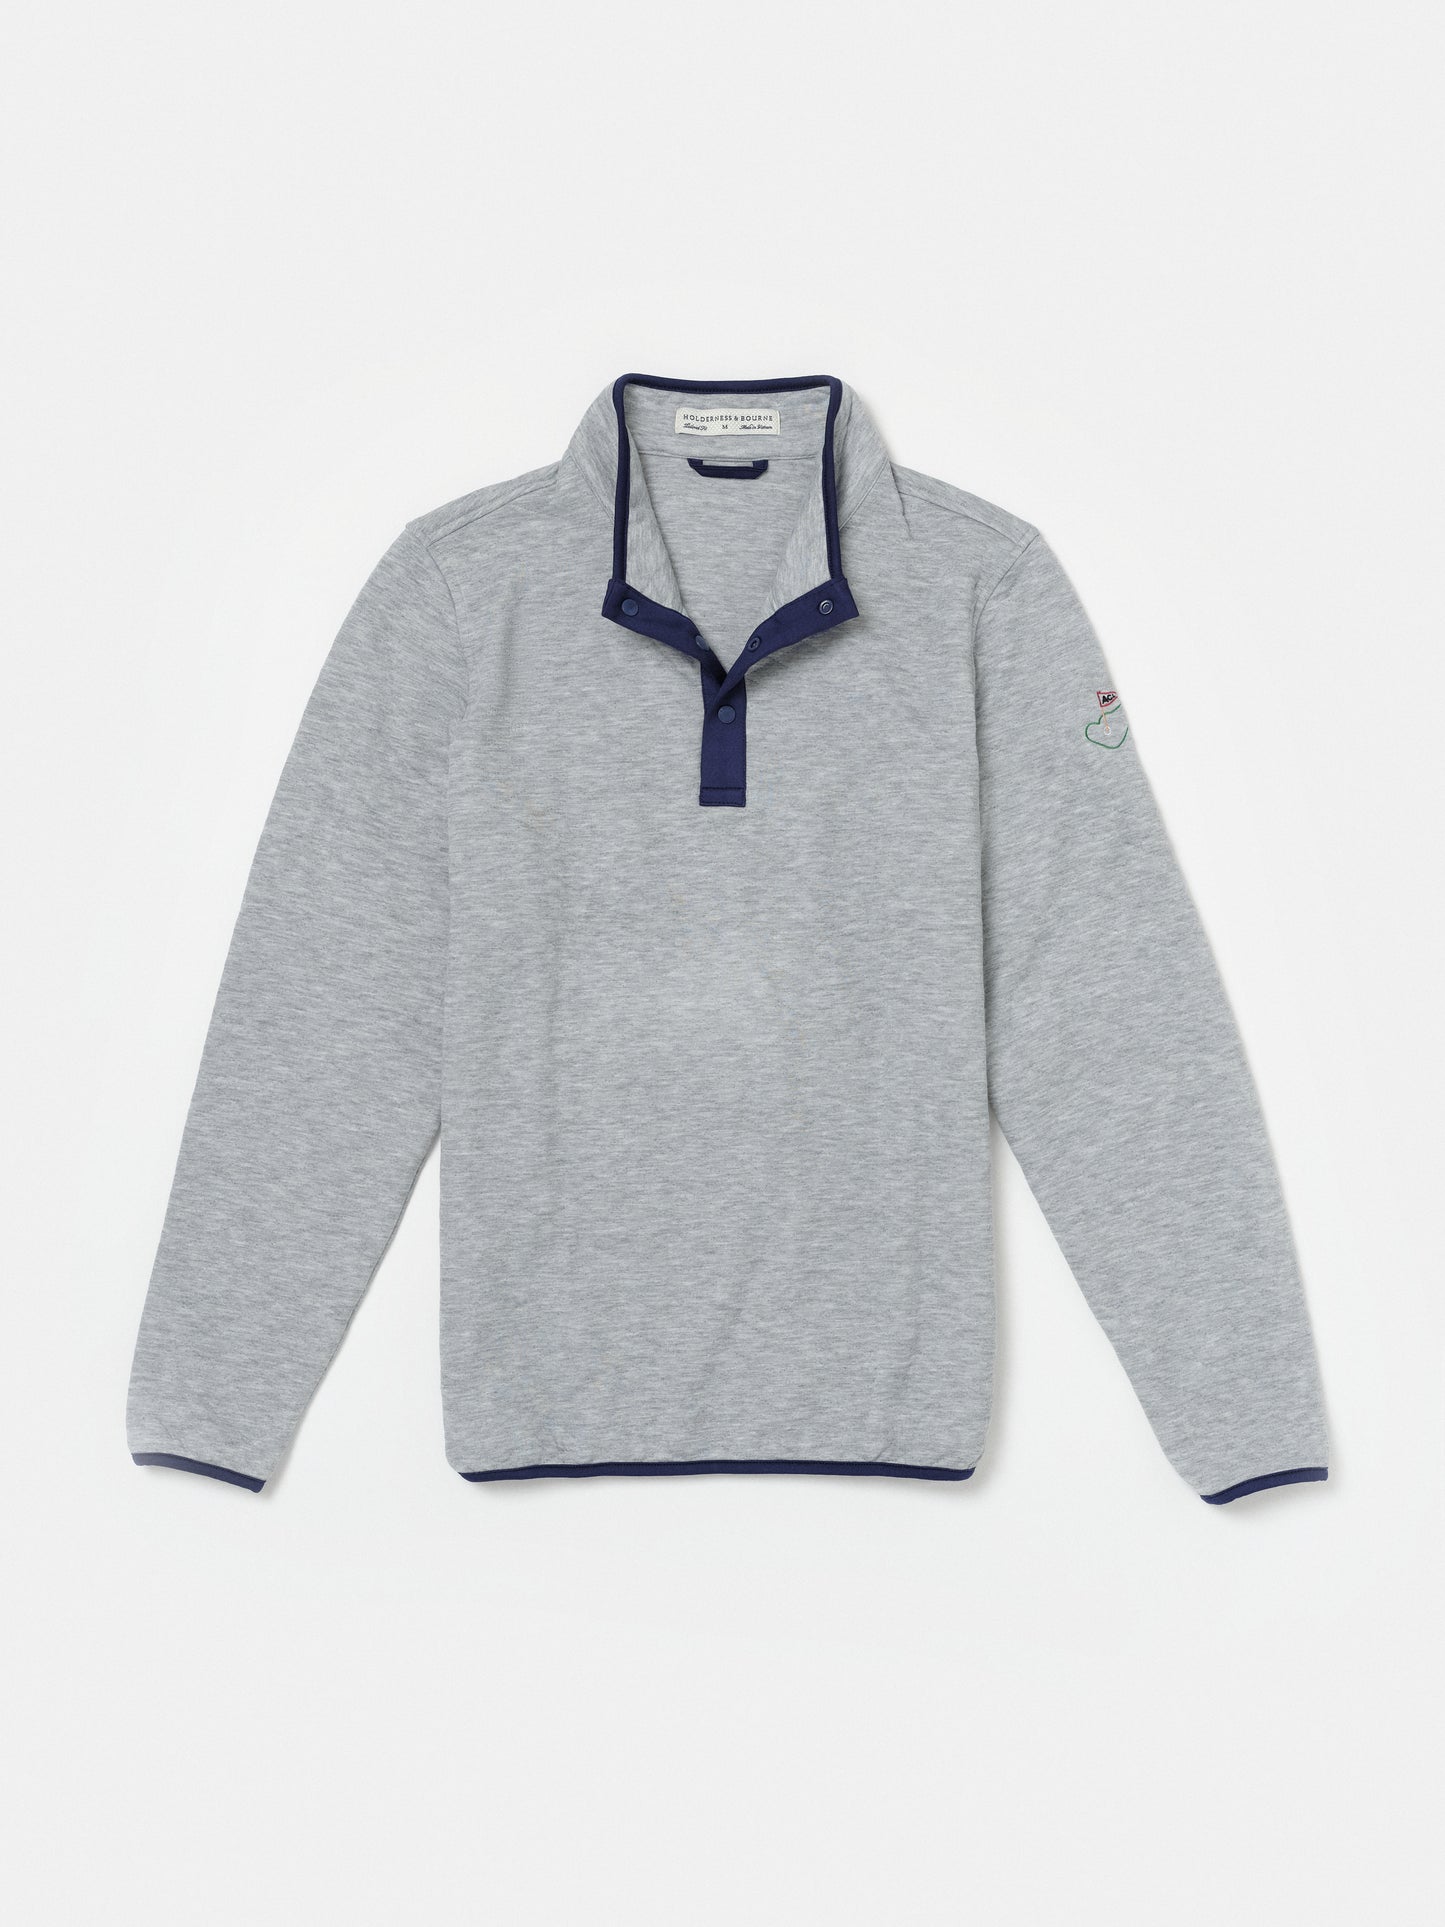 Sullivan Snap Pullover in Gray and Navy